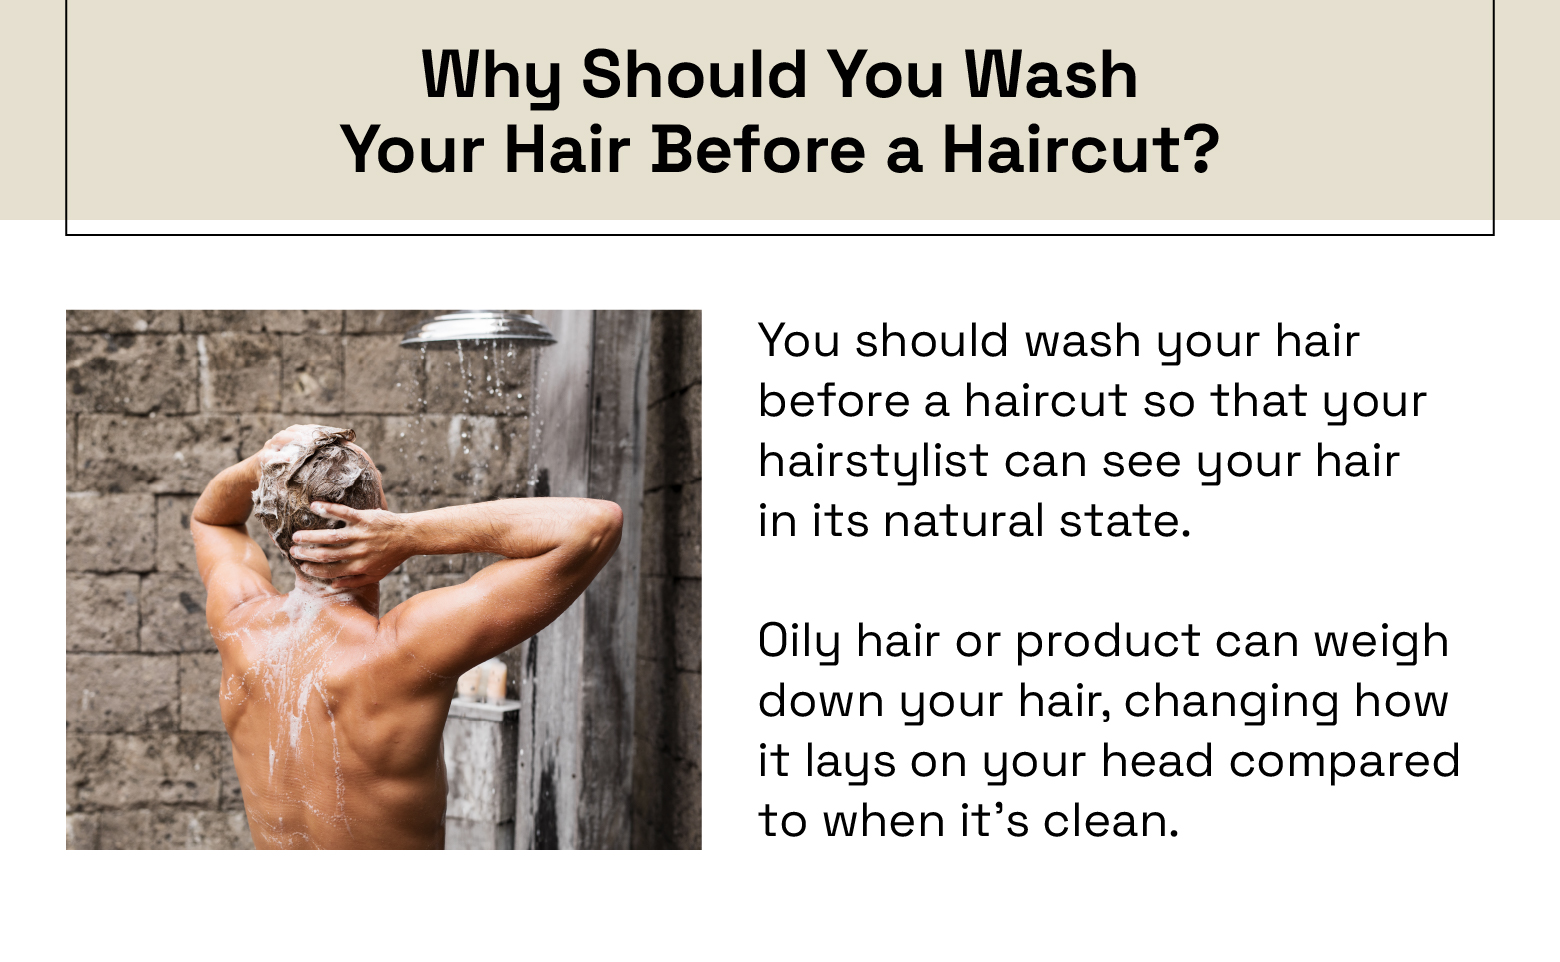 why should you wash your hair before a haircut